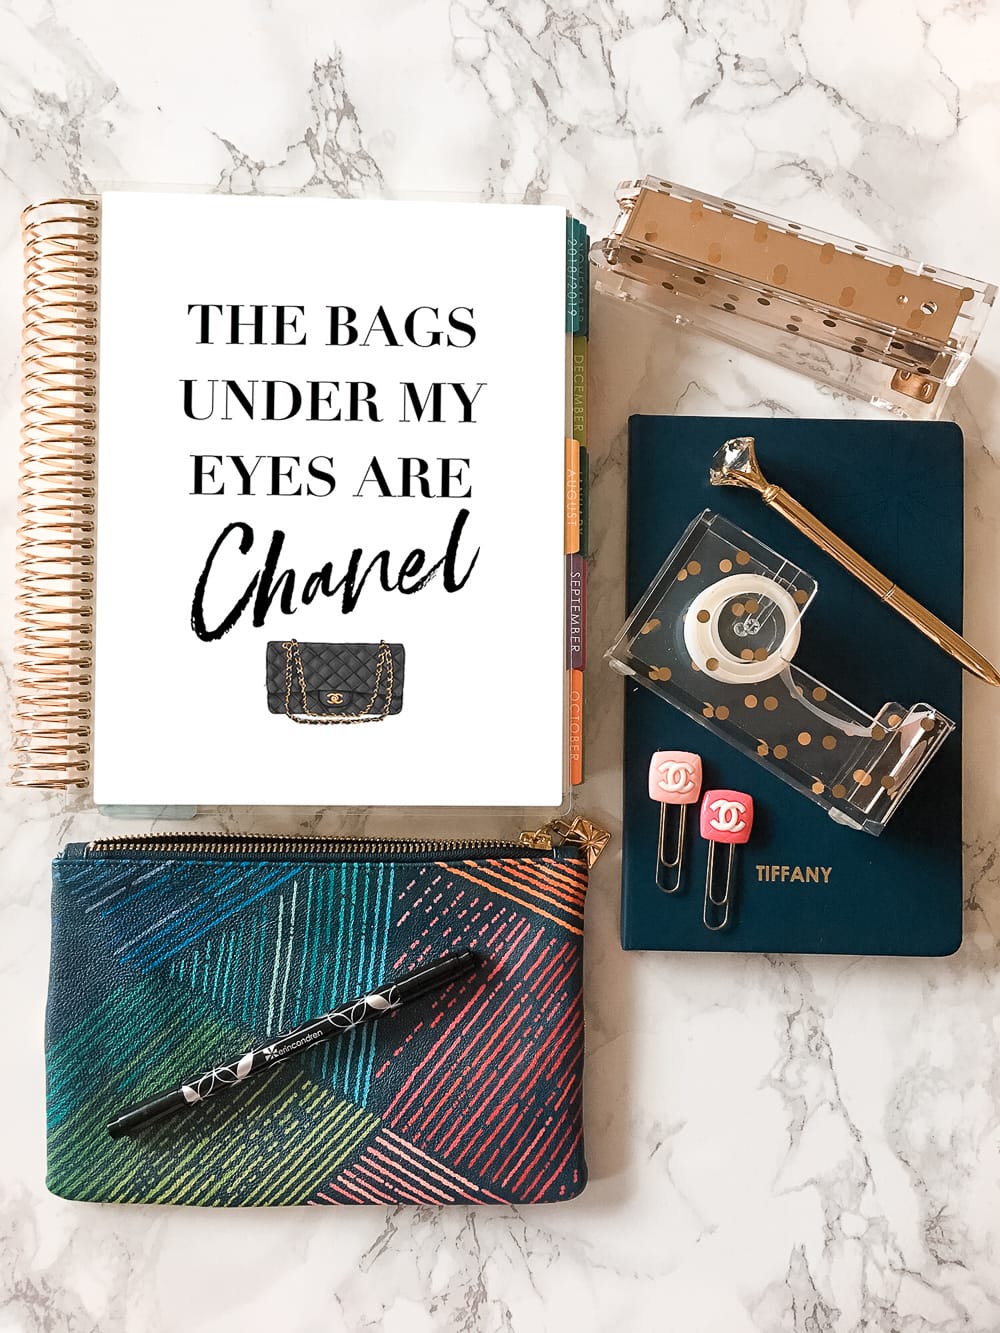 Download this Chanel planner cover and printable for FREE!